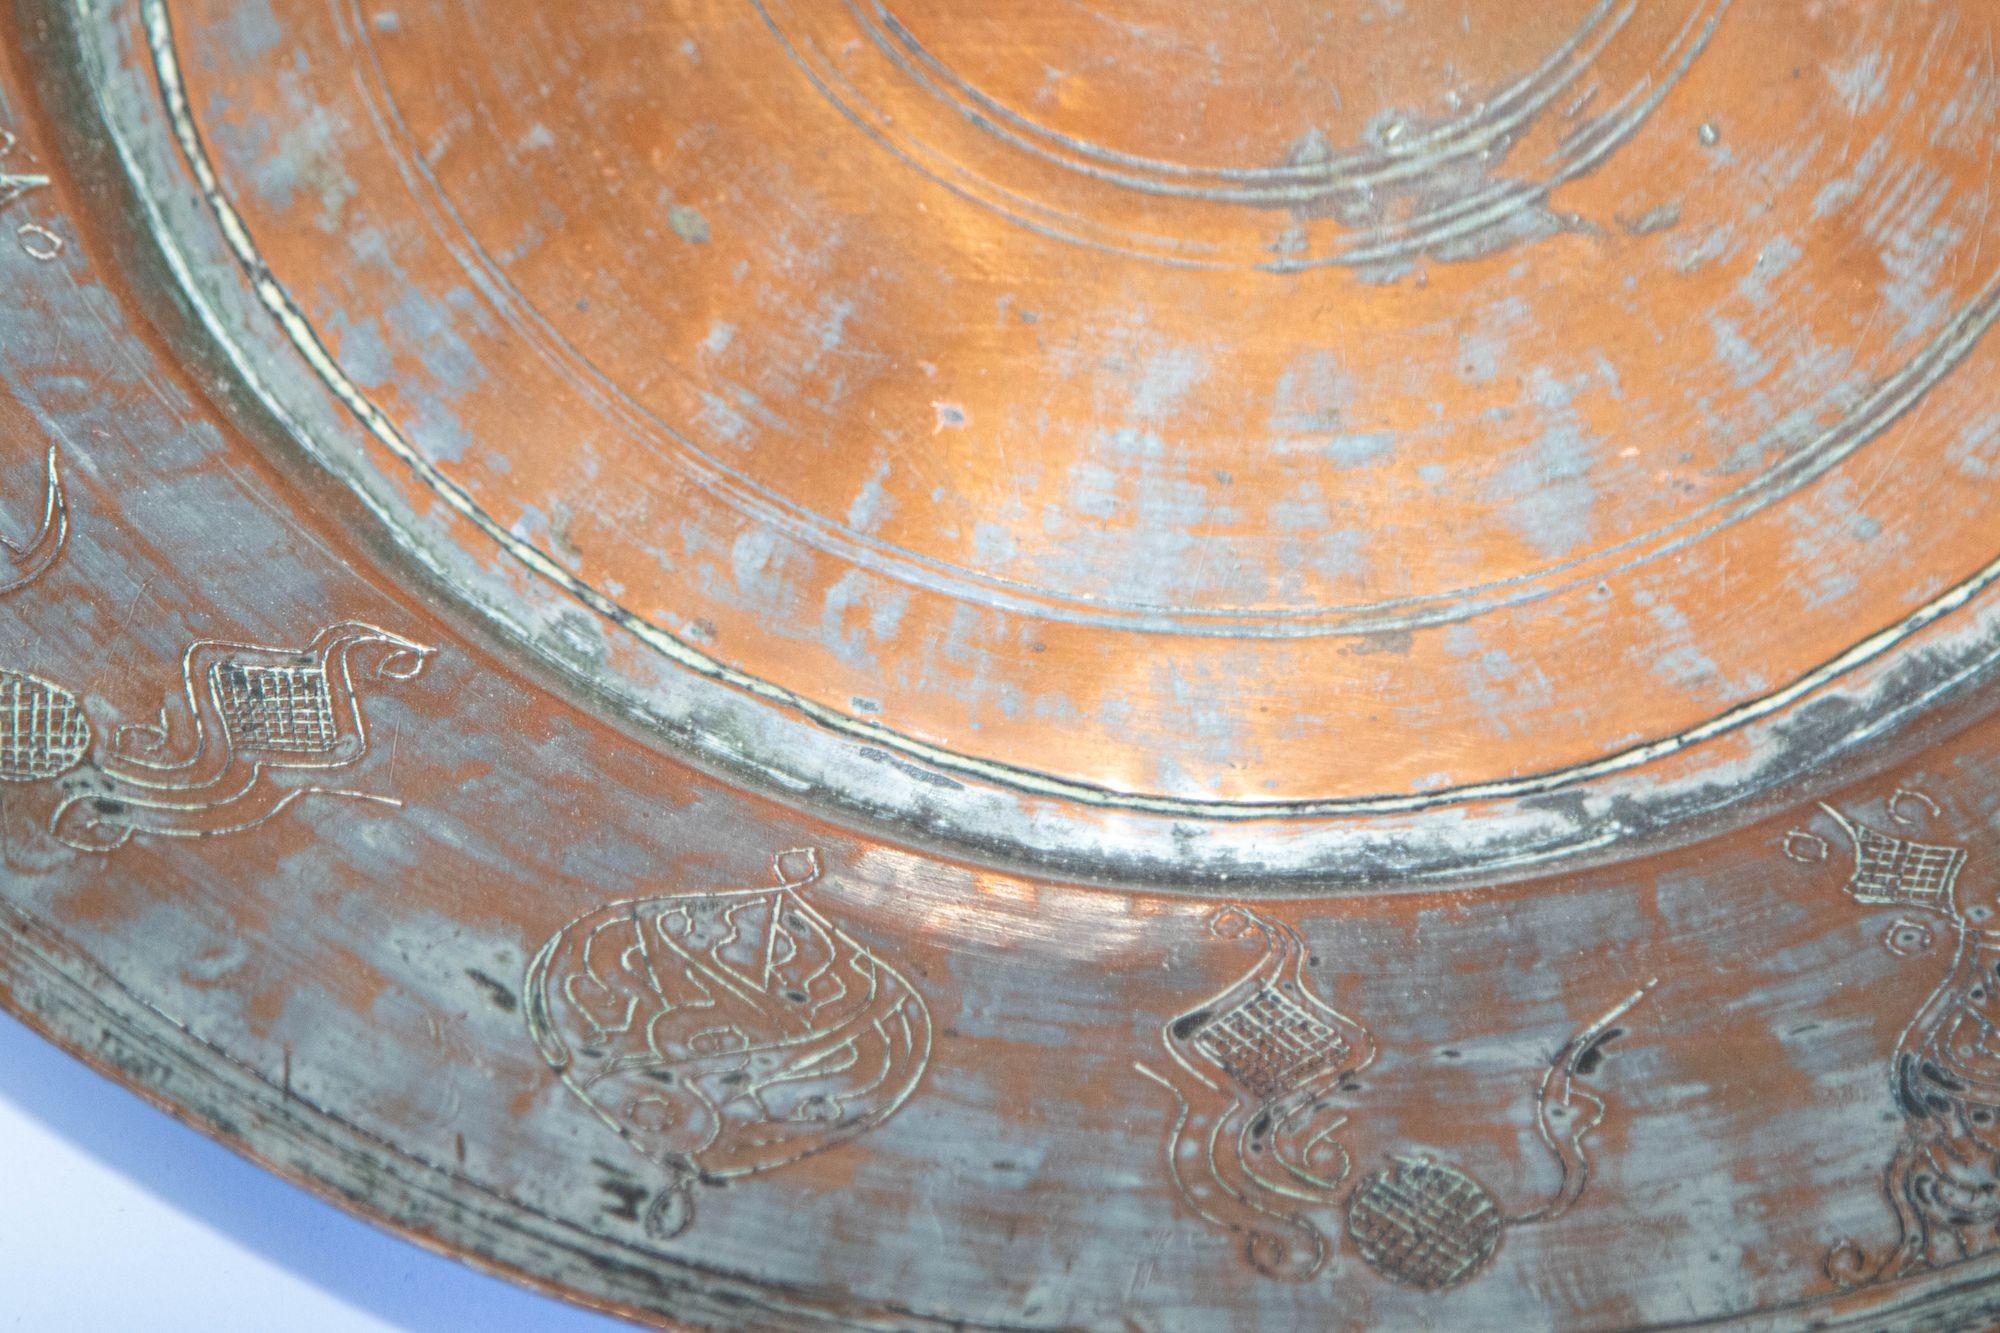 Indian Large Antique Tinned Copper Rajasthani Vessel Bowl